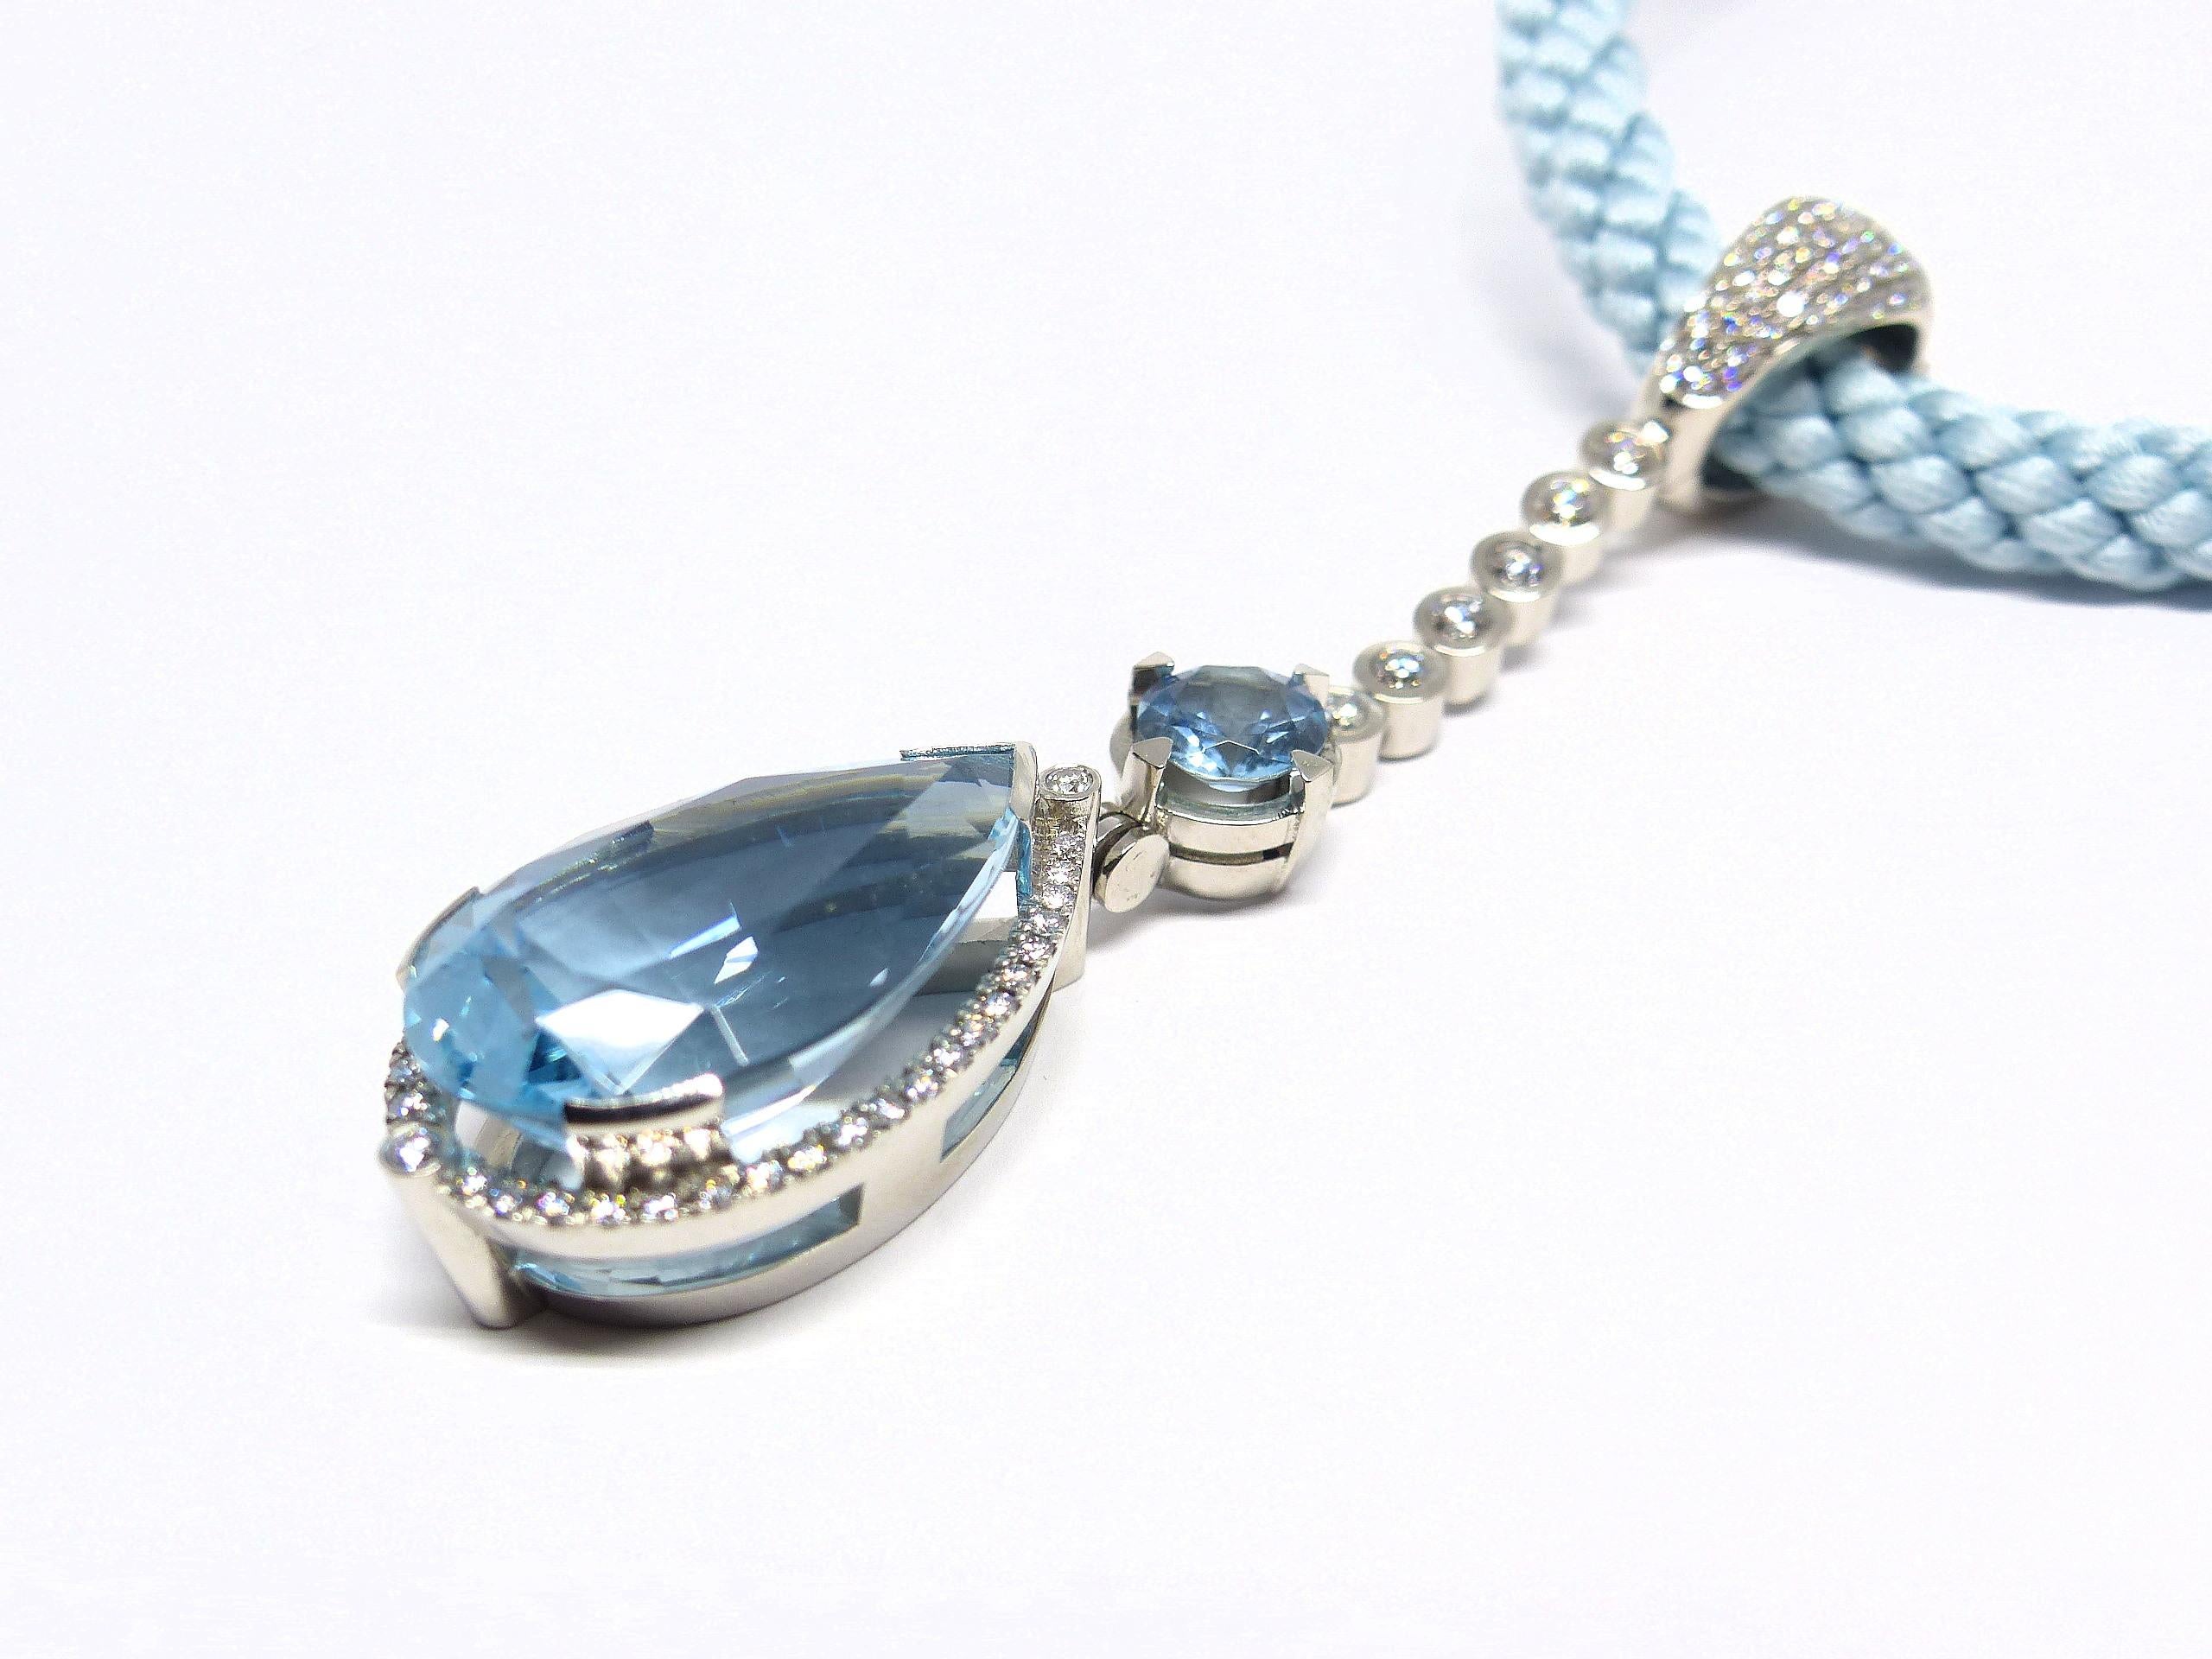 Thomas Leyser is renowned for his contemporary jewellery designs utilizing fine gemstones.

This 950 platinum (32.81g) pendant is set with 1x fine Aquamarine in a magnificient blue color (pearshape, 25x15.5x11.5mm, 21.58ct) + 1x Aquamarine (round,